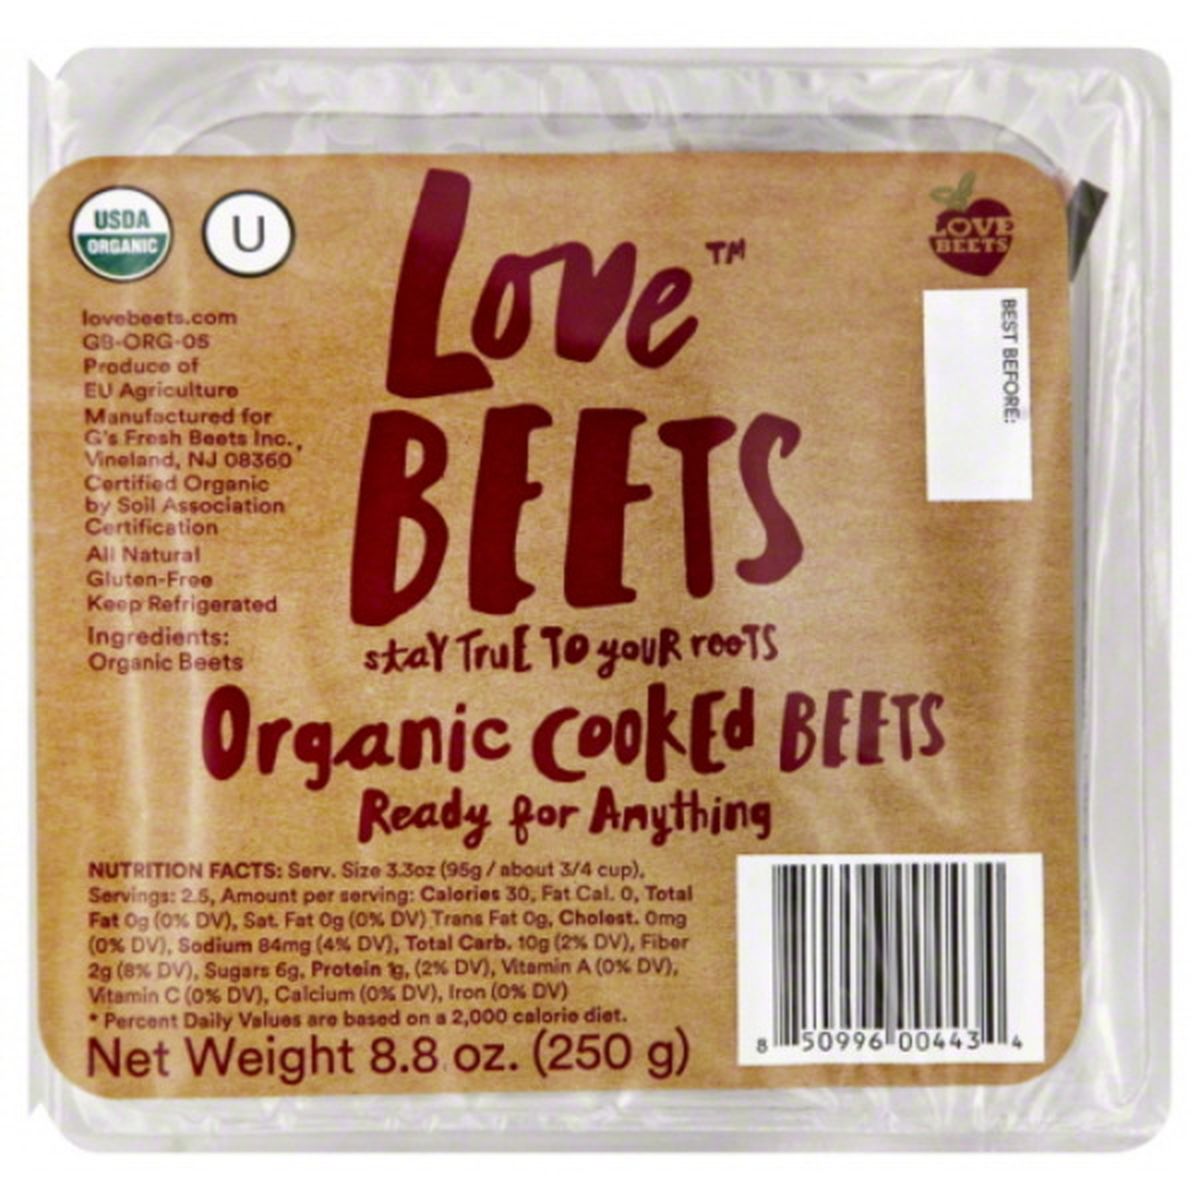 Calories in Love Beets Beets, Cooked, Organic